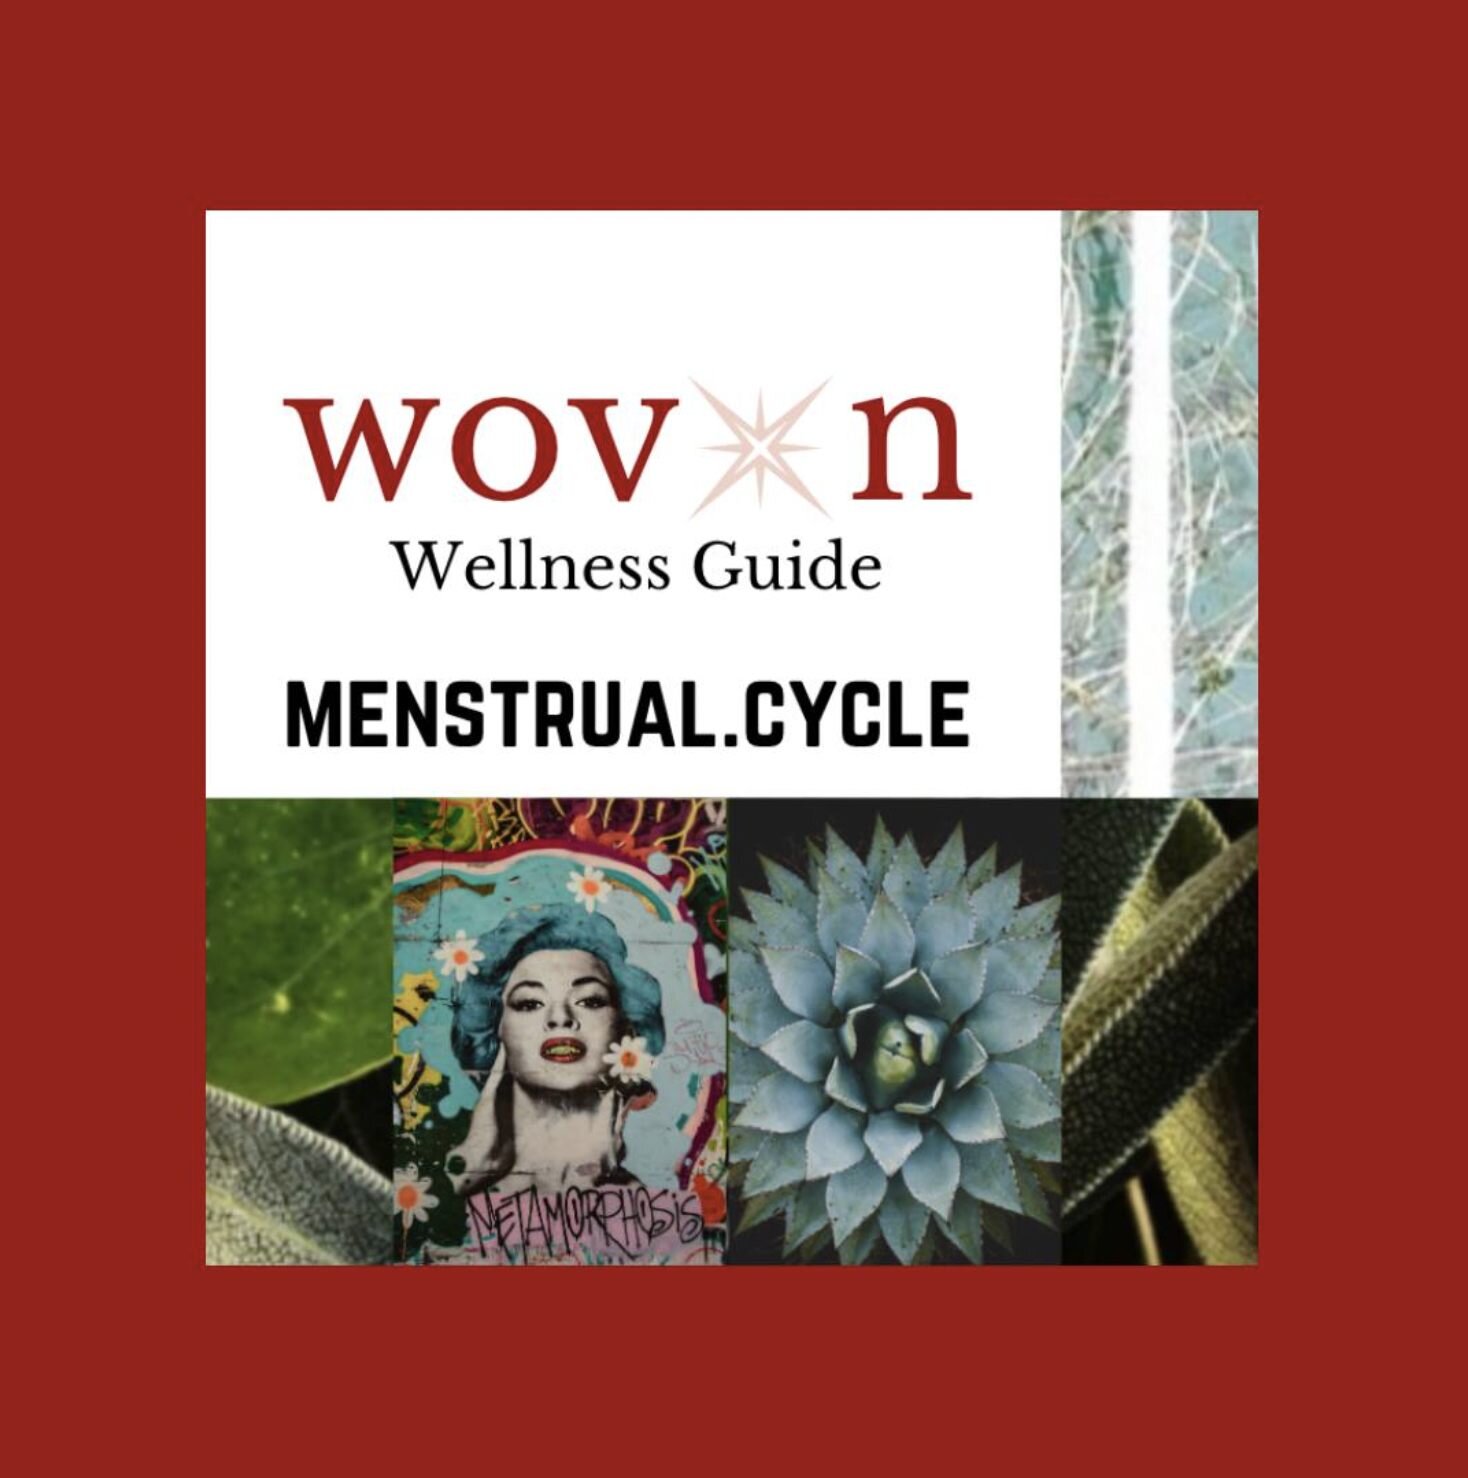 Our menstrual cycle is more than our period. For many of us, our menstrual bleed is the internal clock by which we keep time. The other phases of the cycle can seem irrelevant (unless we're trying to conceive), and years might go by without a review 